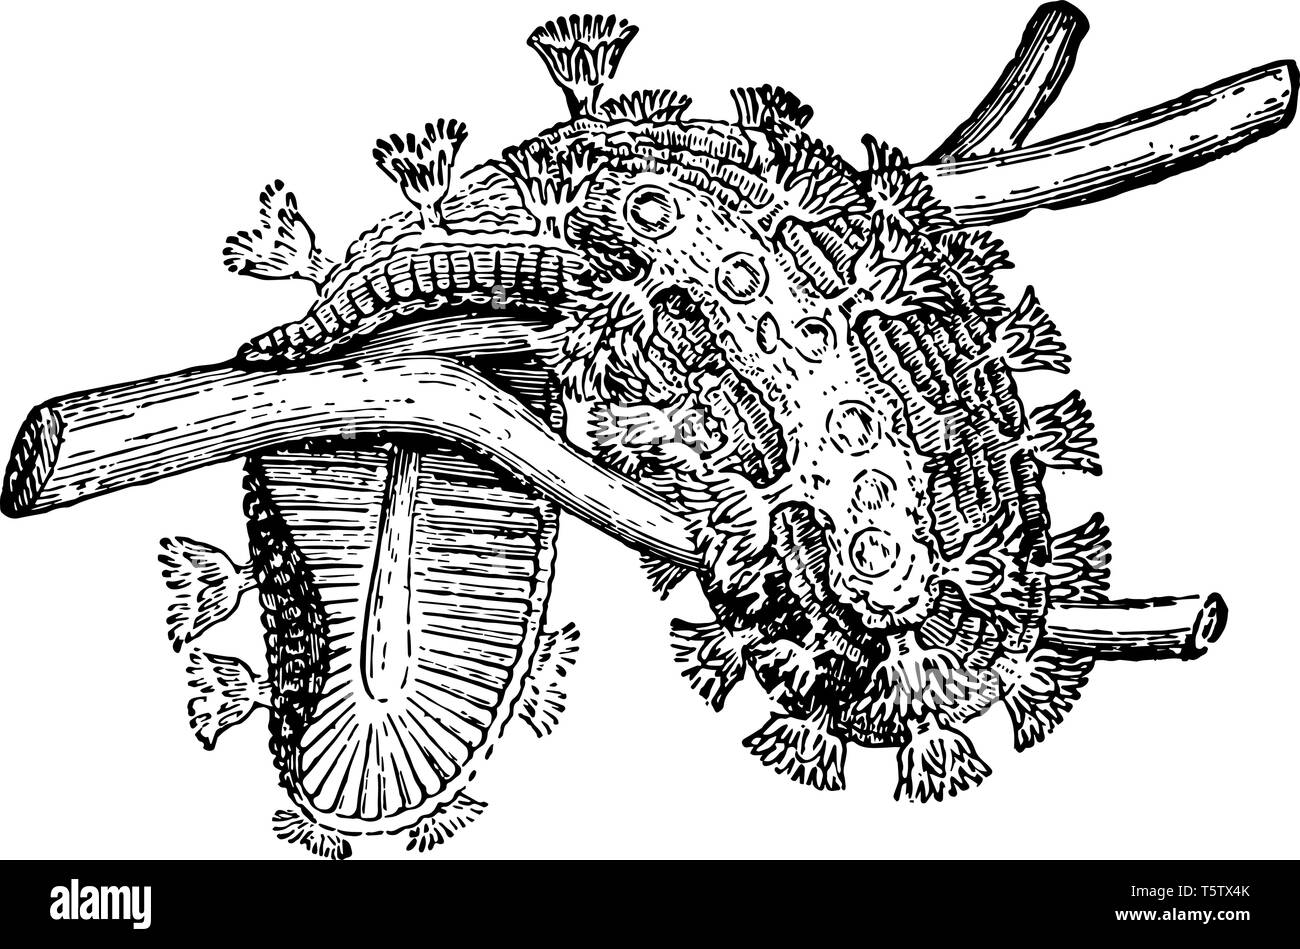 Cristatella Mucedo is a bryozoan in the family Cristatellidae and the only species of the genus Cristatella vintage line drawing or engraving illustra Stock Vector